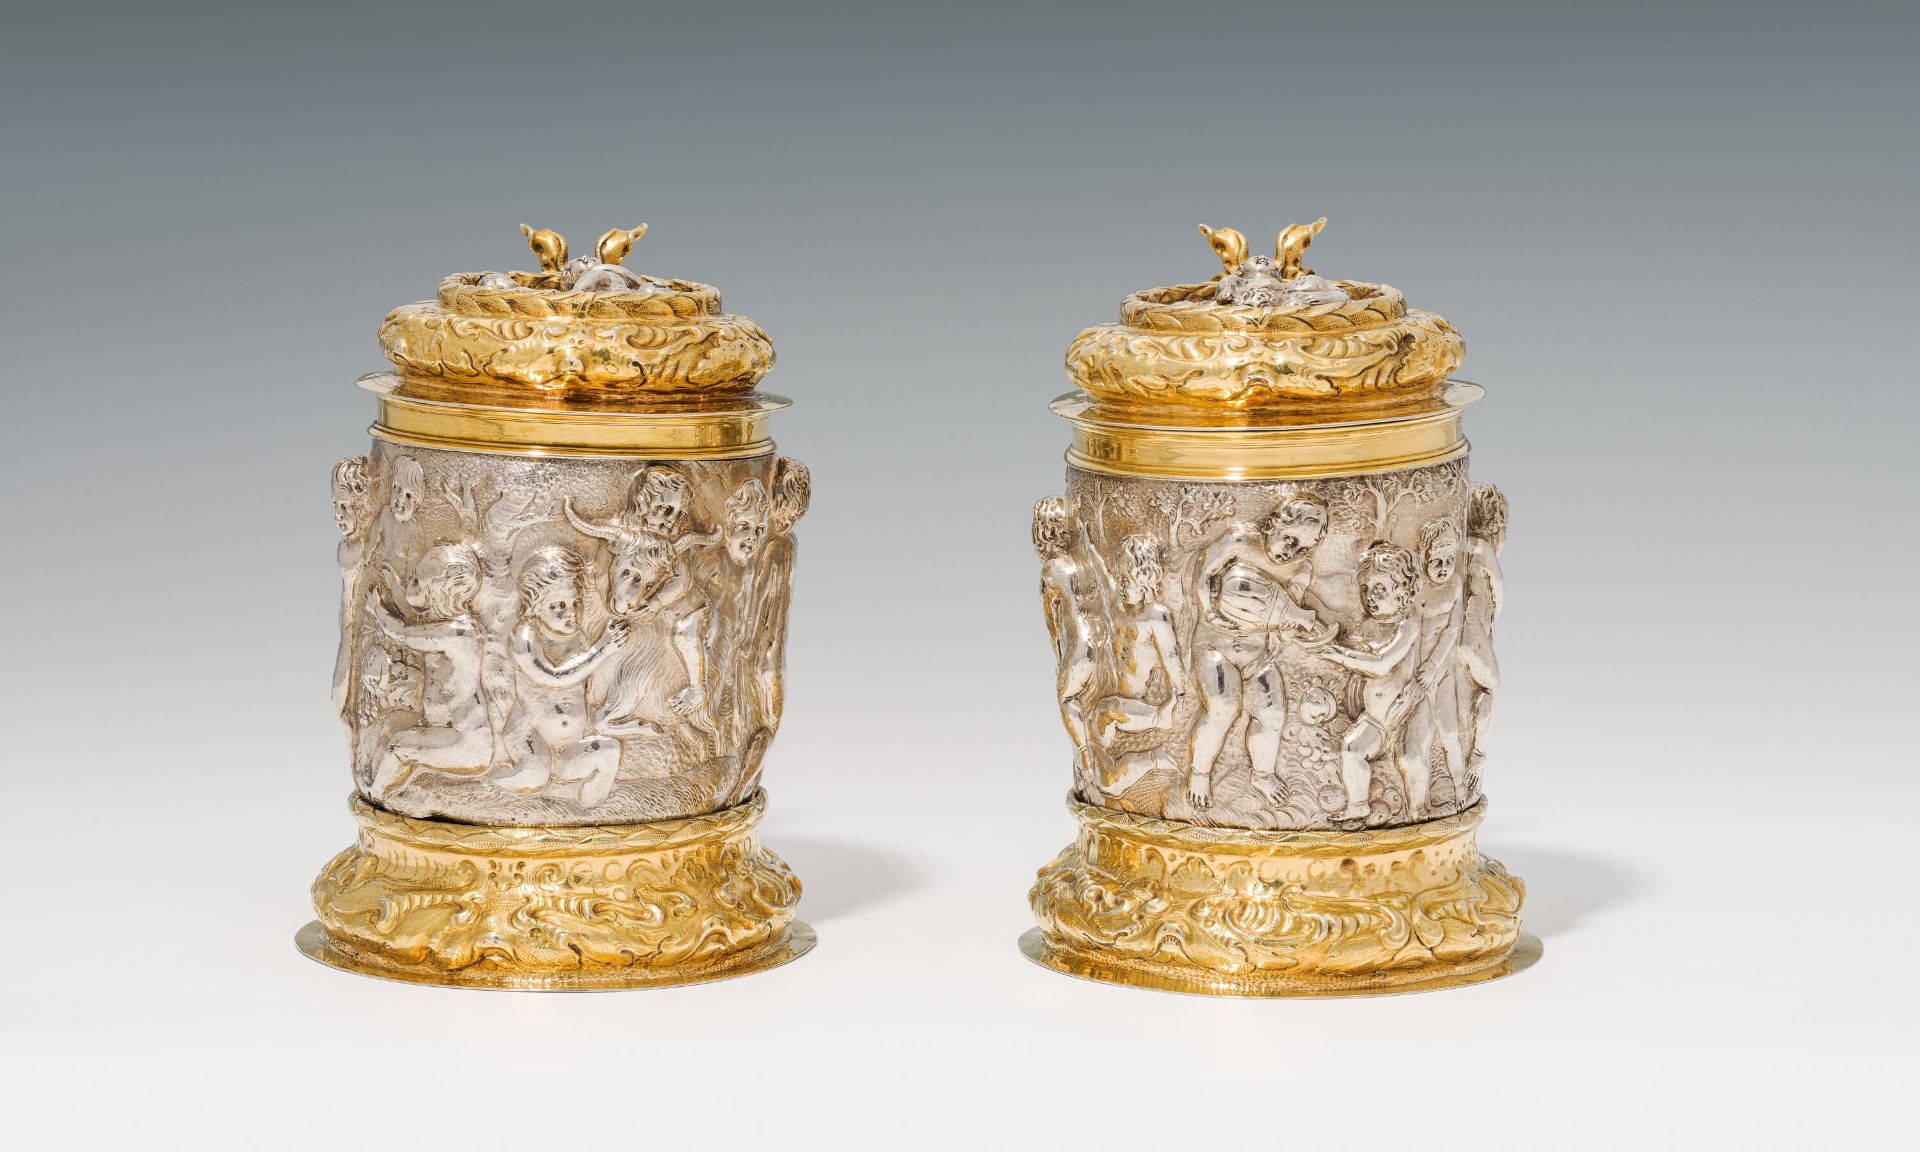 Pair of tankardsHamburg, c. 1670silver, partially gilded; inside with engraved english emblem (